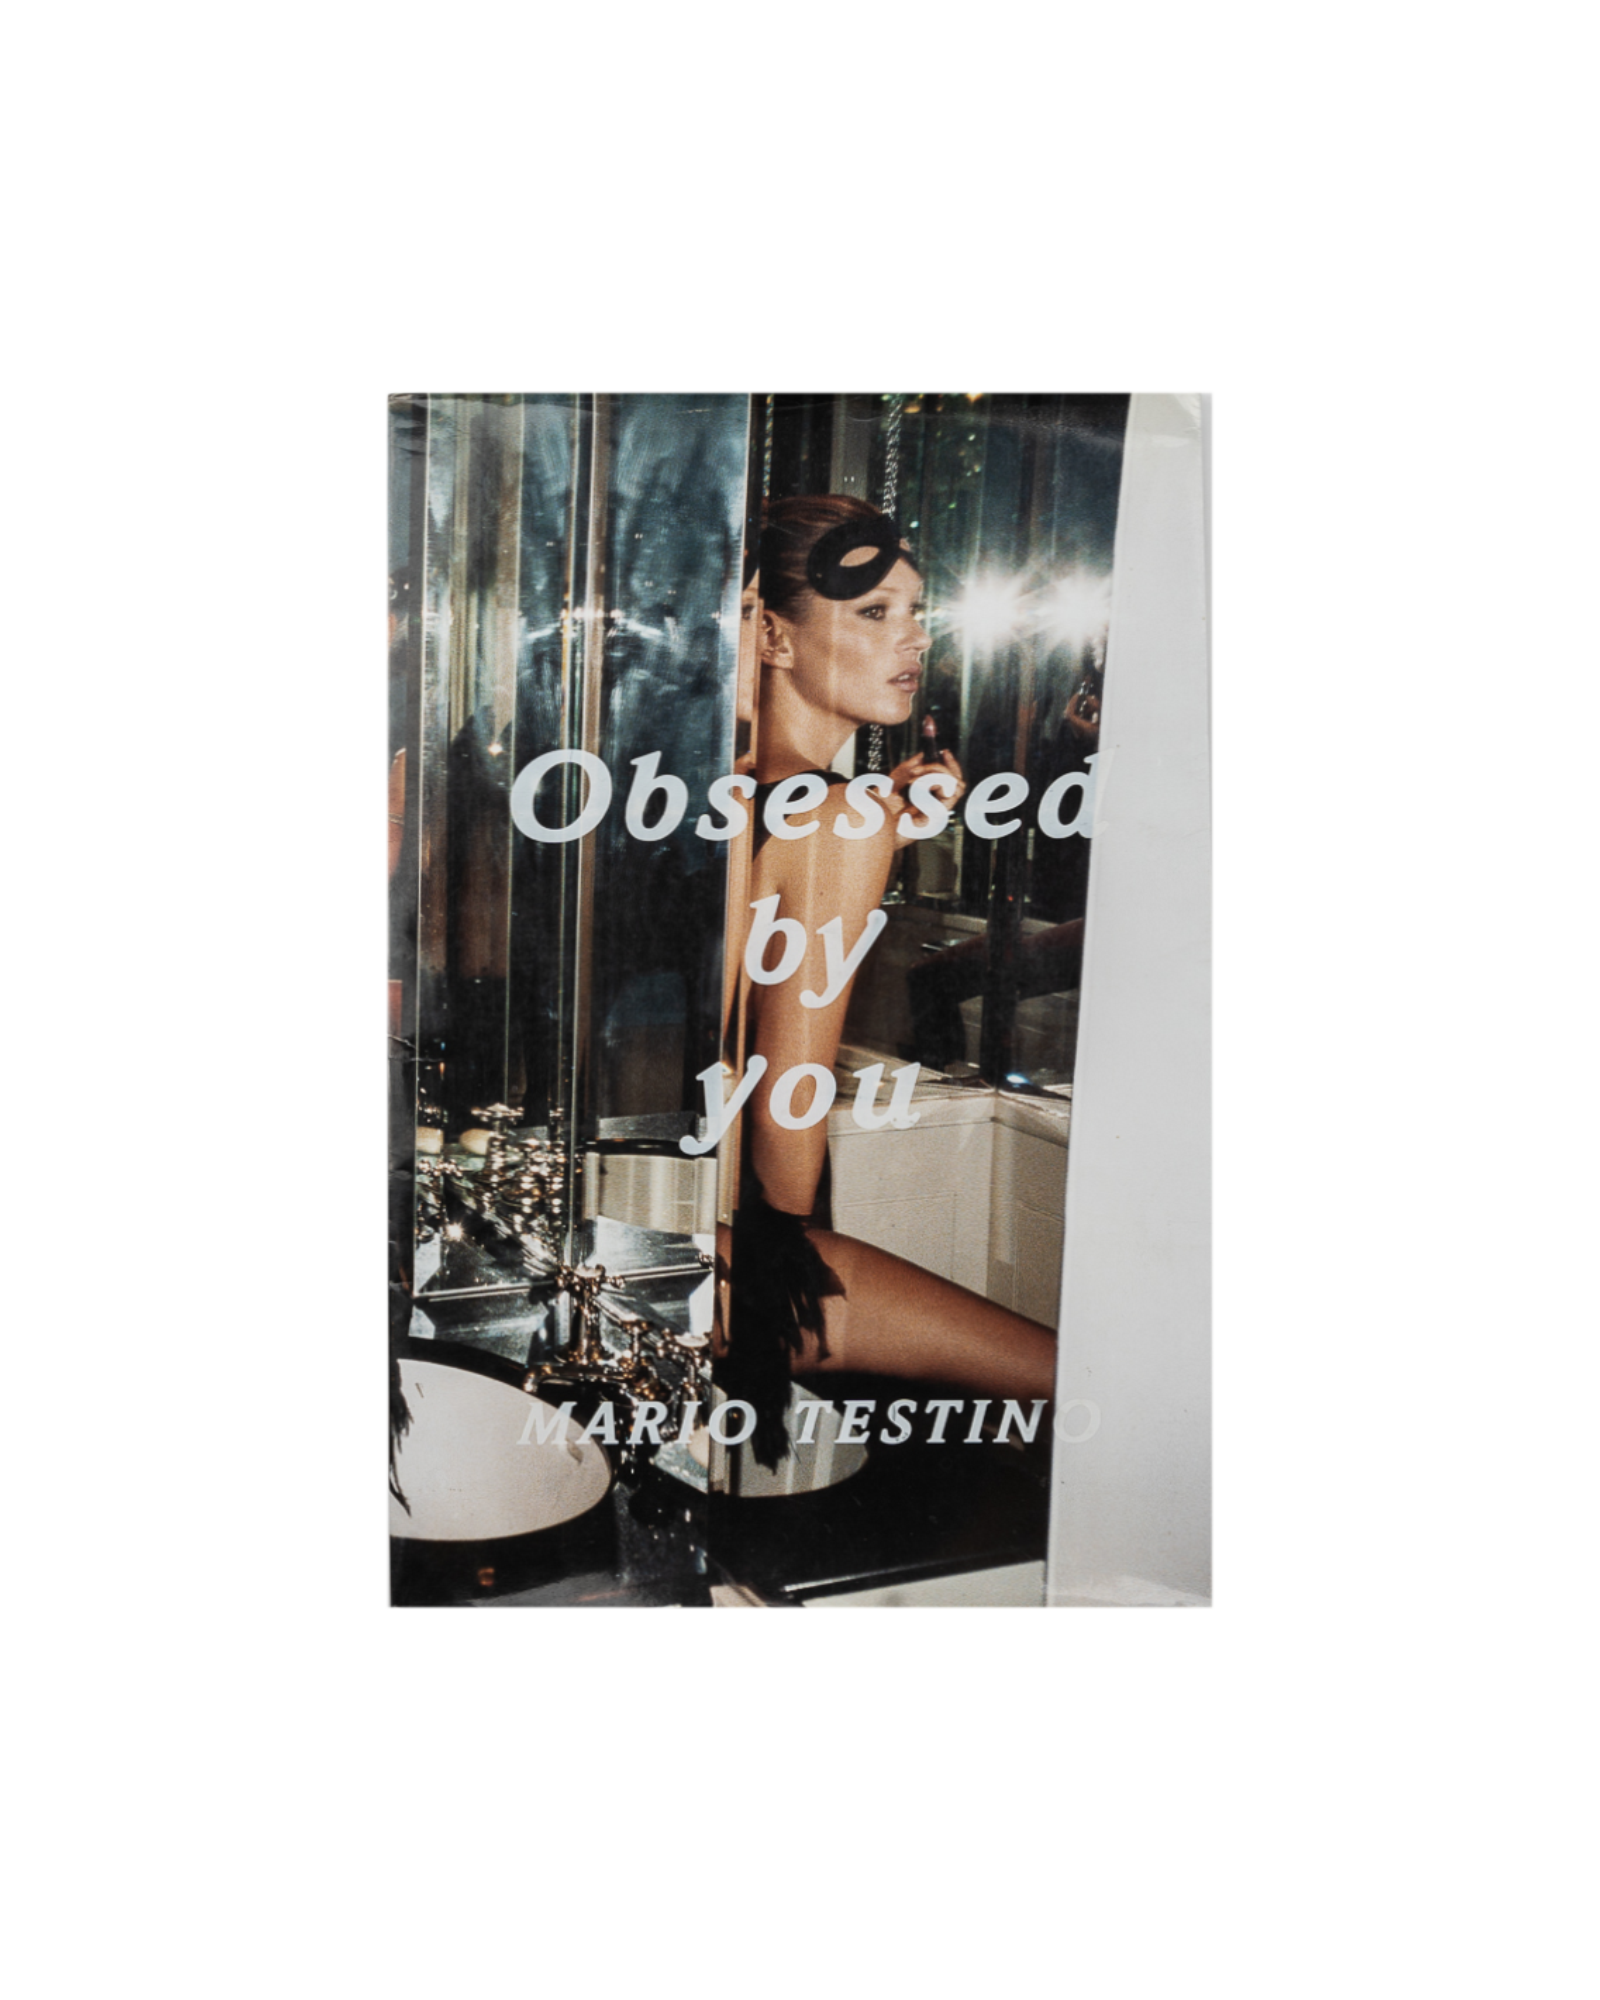 Classic Paris - Book - Mario Testino - Obsessed by you